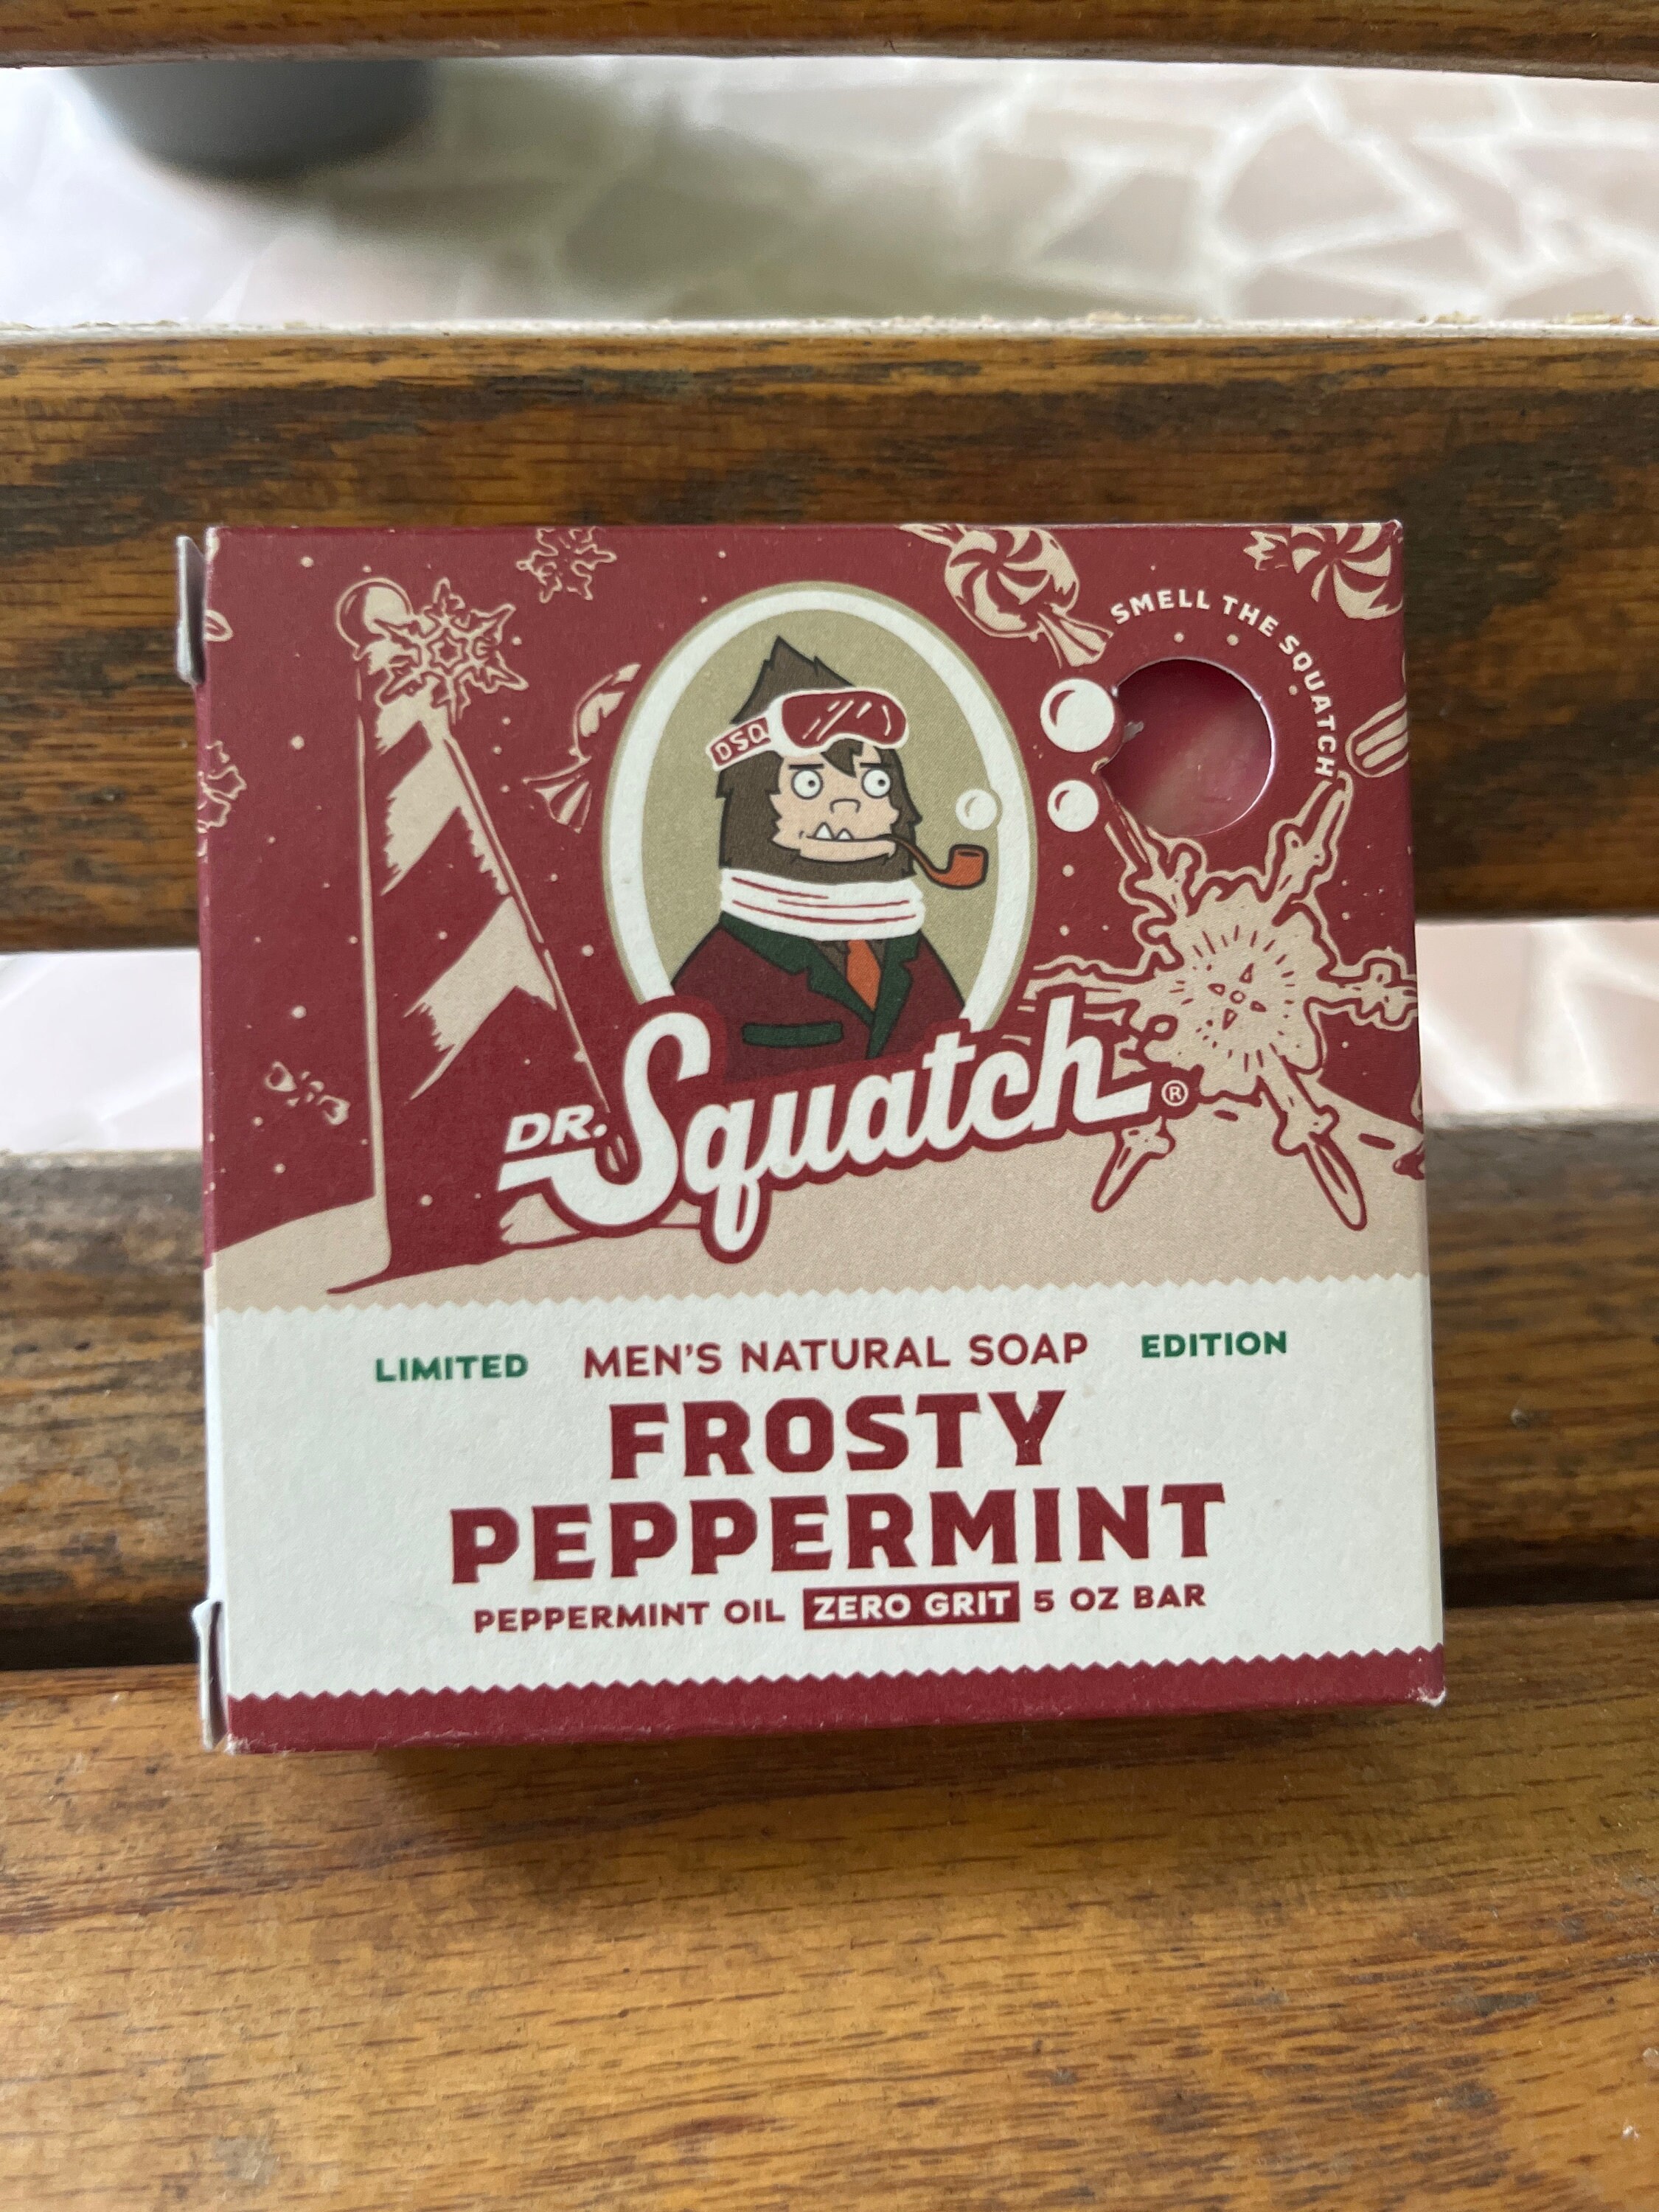 frosty peppermint  Dr.squatch 